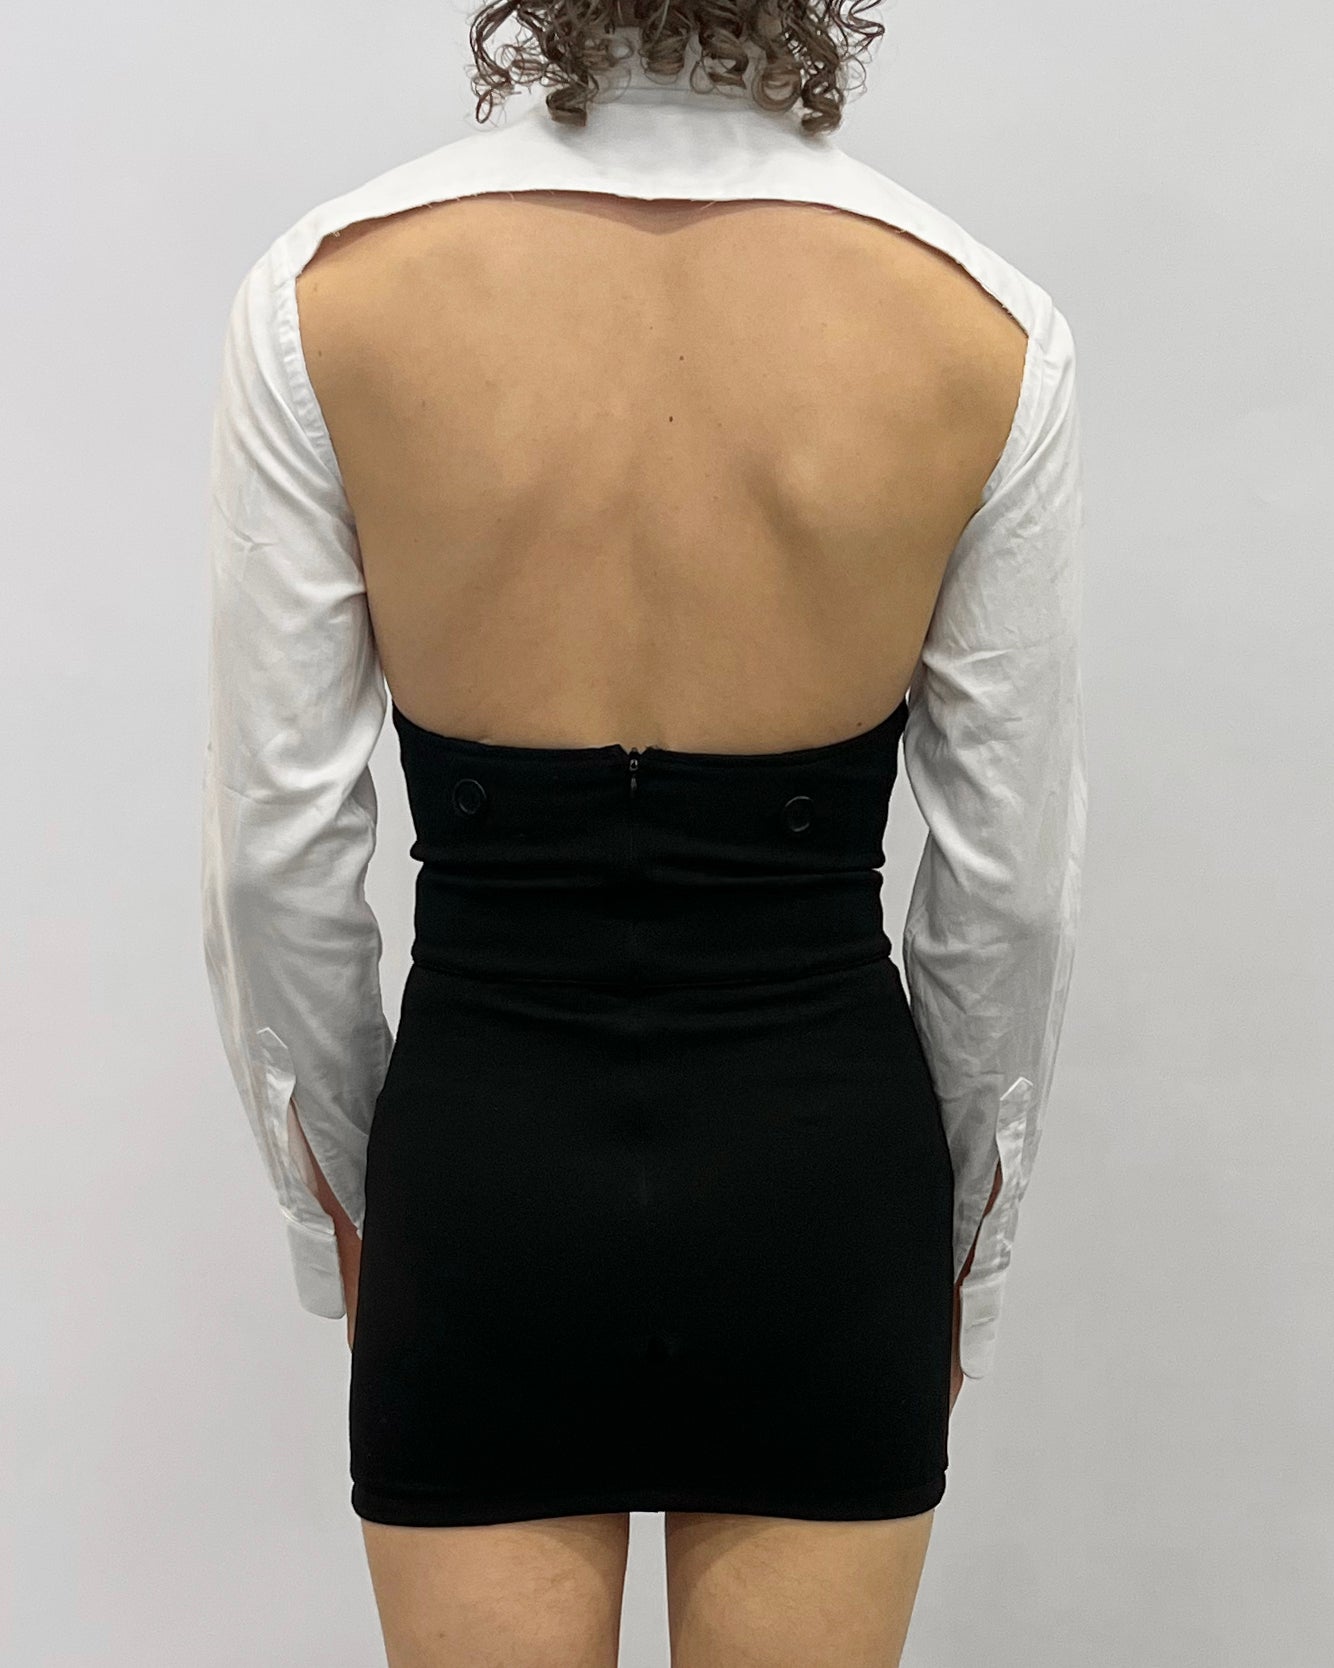 the Backless knot shirt.